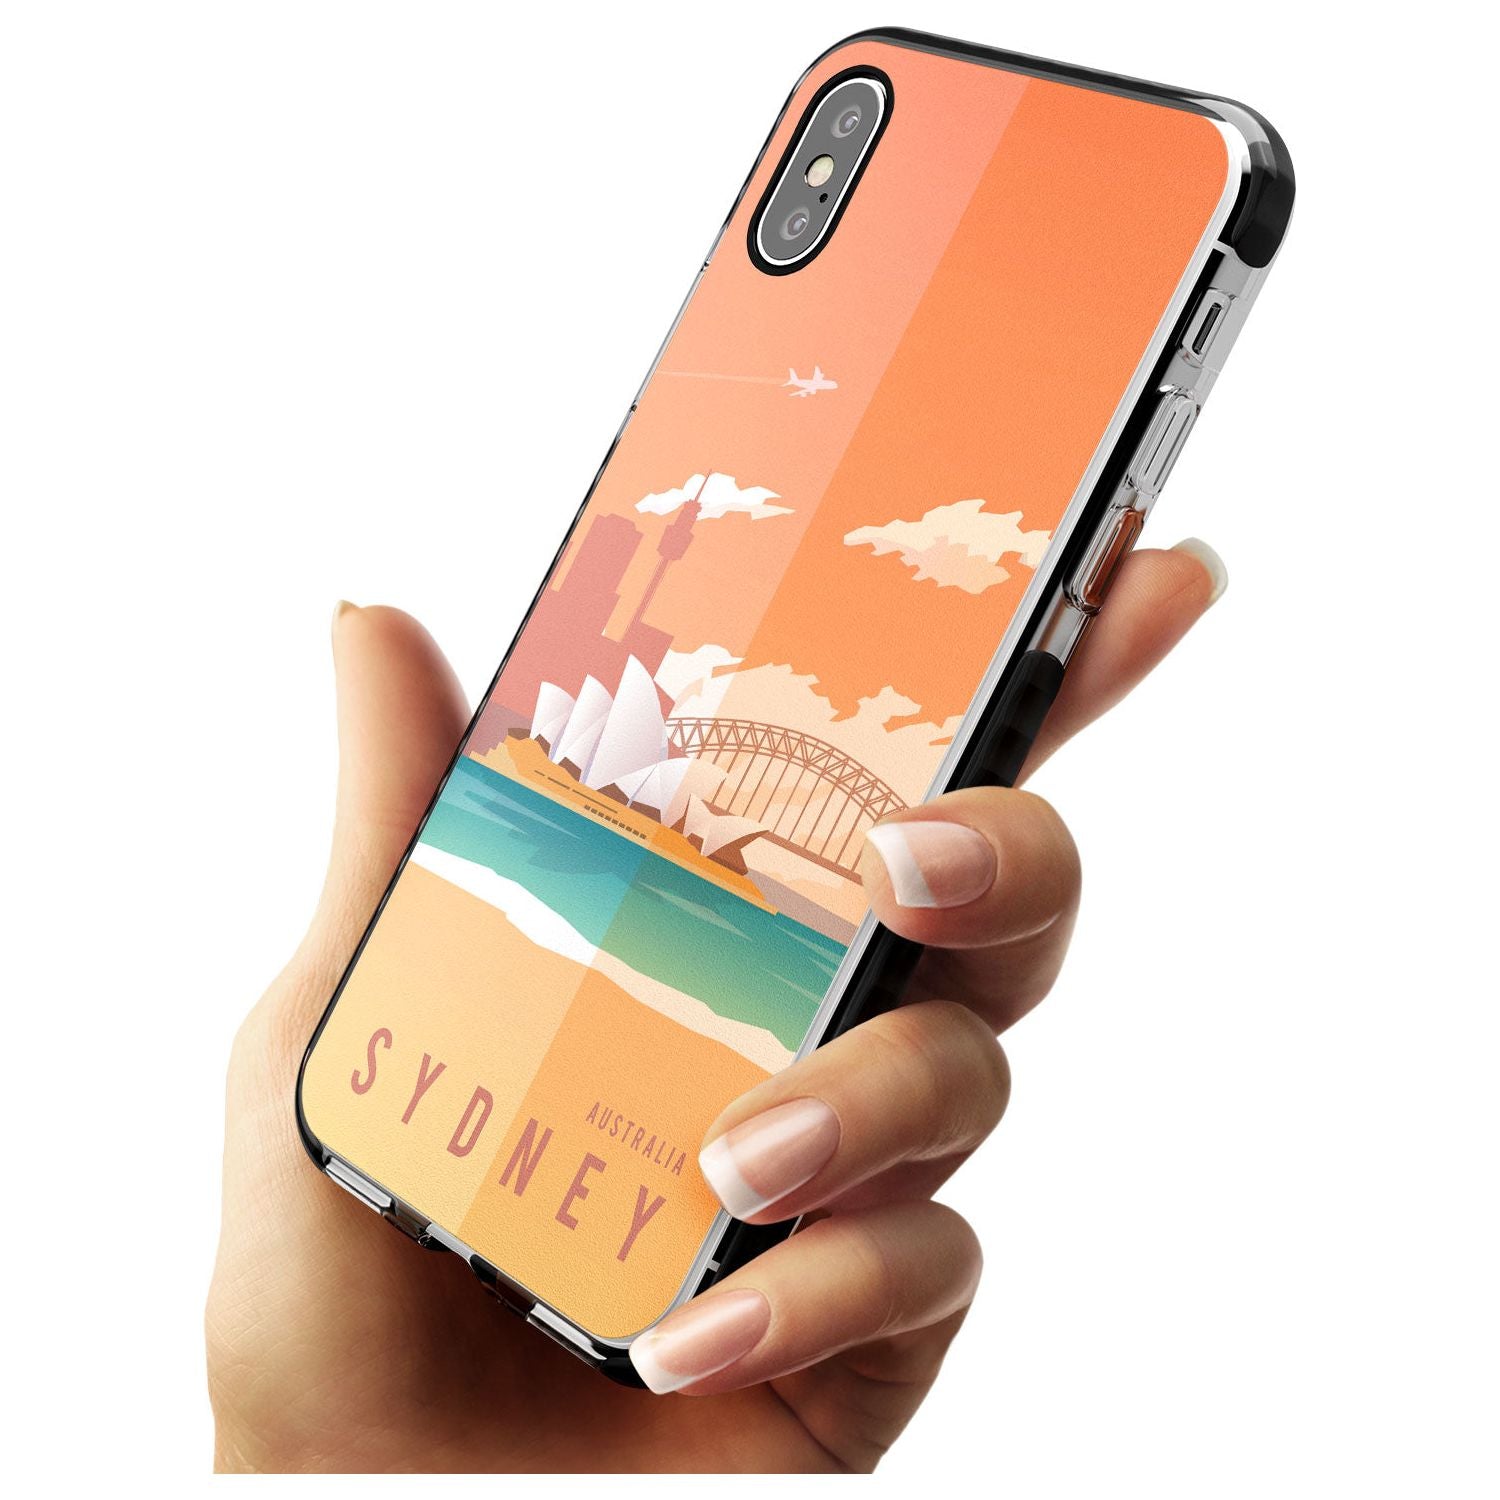 Vintage Travel Poster Sydney Black Impact Phone Case for iPhone X XS Max XR